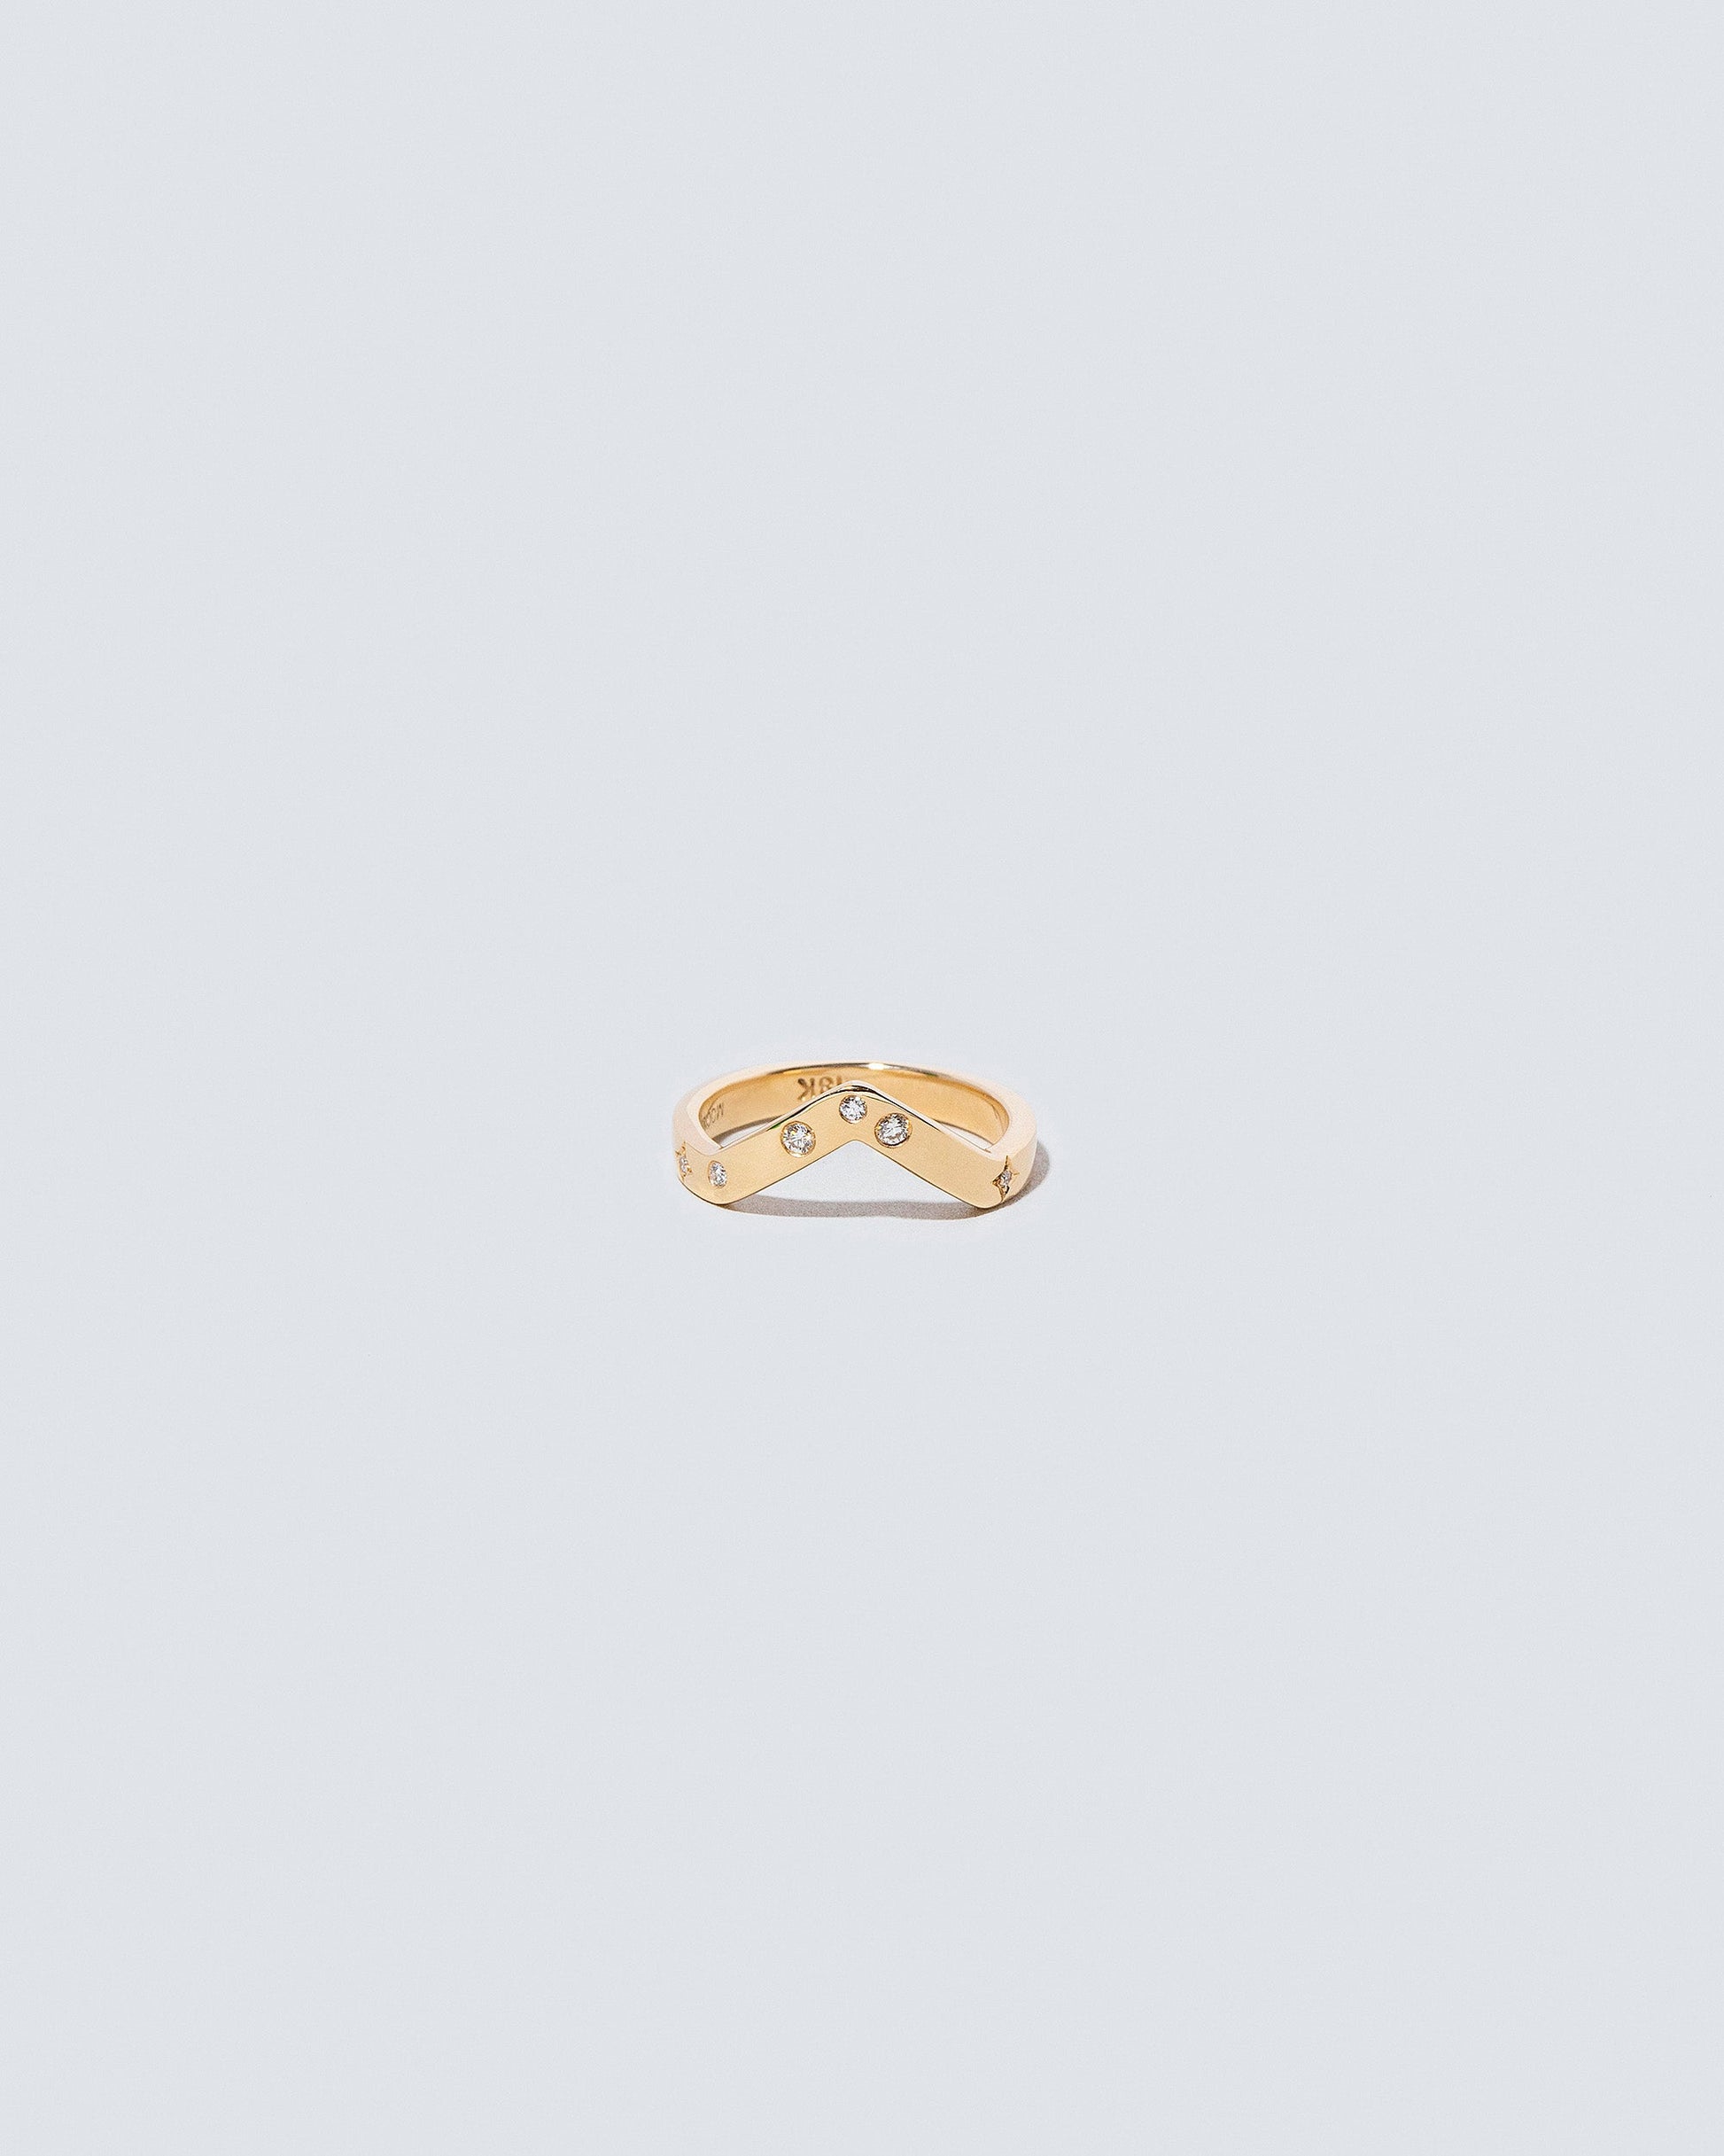 Yellow Gold Wide High Peak Band with white diamond little array added on light color background.